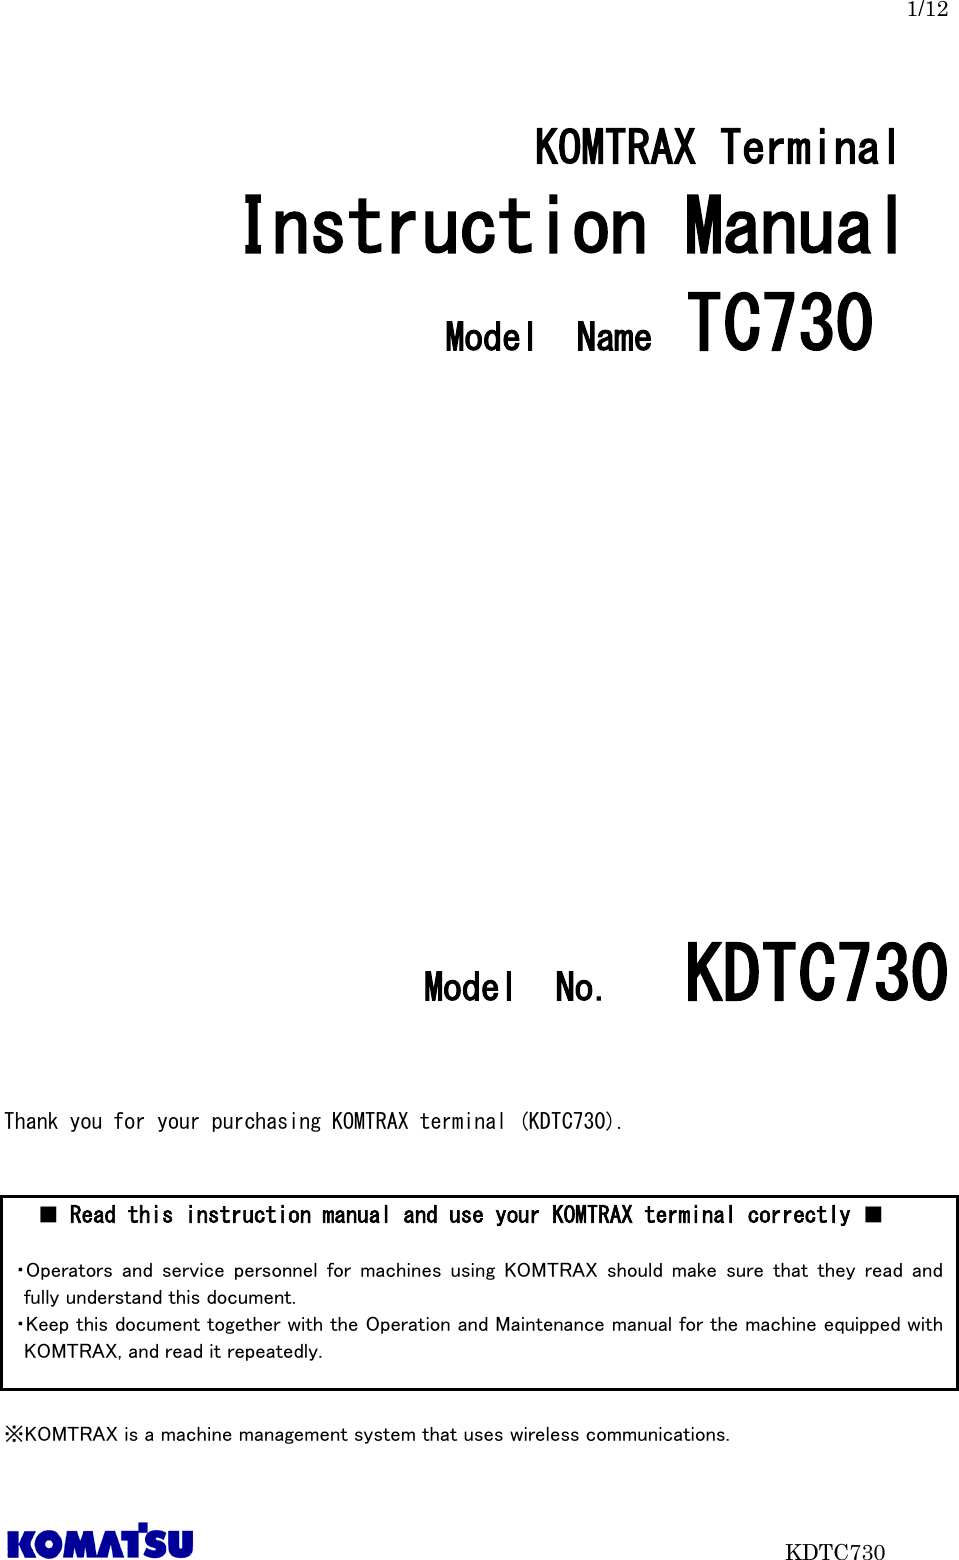   1/12                           KDTC730  KOMTRAX Terminal   Instruction Manual  Model  Name TC730                    Model  No．    KDTC730    Thank you for your purchasing KOMTRAX terminal (KDTC730).           ※KOMTRAX is a machine management system that uses wireless communications. ■ Read this instruction manual and use your KOMTRAX terminal correctly ■  ・Operators  and  service  personnel  for  machines  using  KOMTRAX  should  make  sure  that  they  read  and fully understand this document.   ・Keep this document together with the Operation and Maintenance manual for the machine equipped with KOMTRAX, and read it repeatedly.  